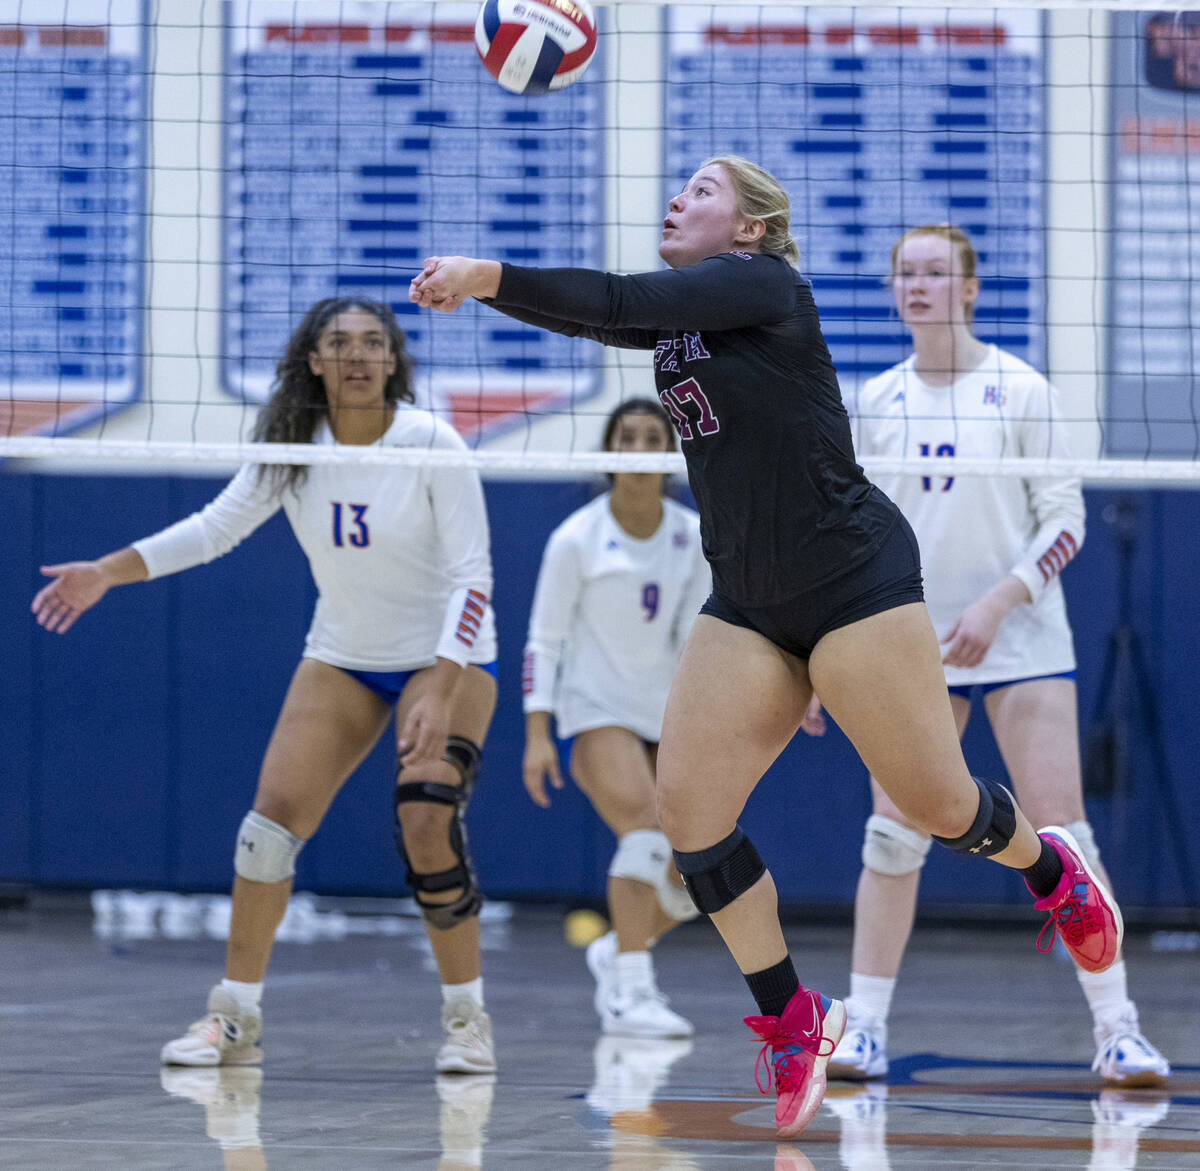 Faith Lutheran's Savannah Wise (17) digs the ball out versus Bishop Gorman during the second se ...